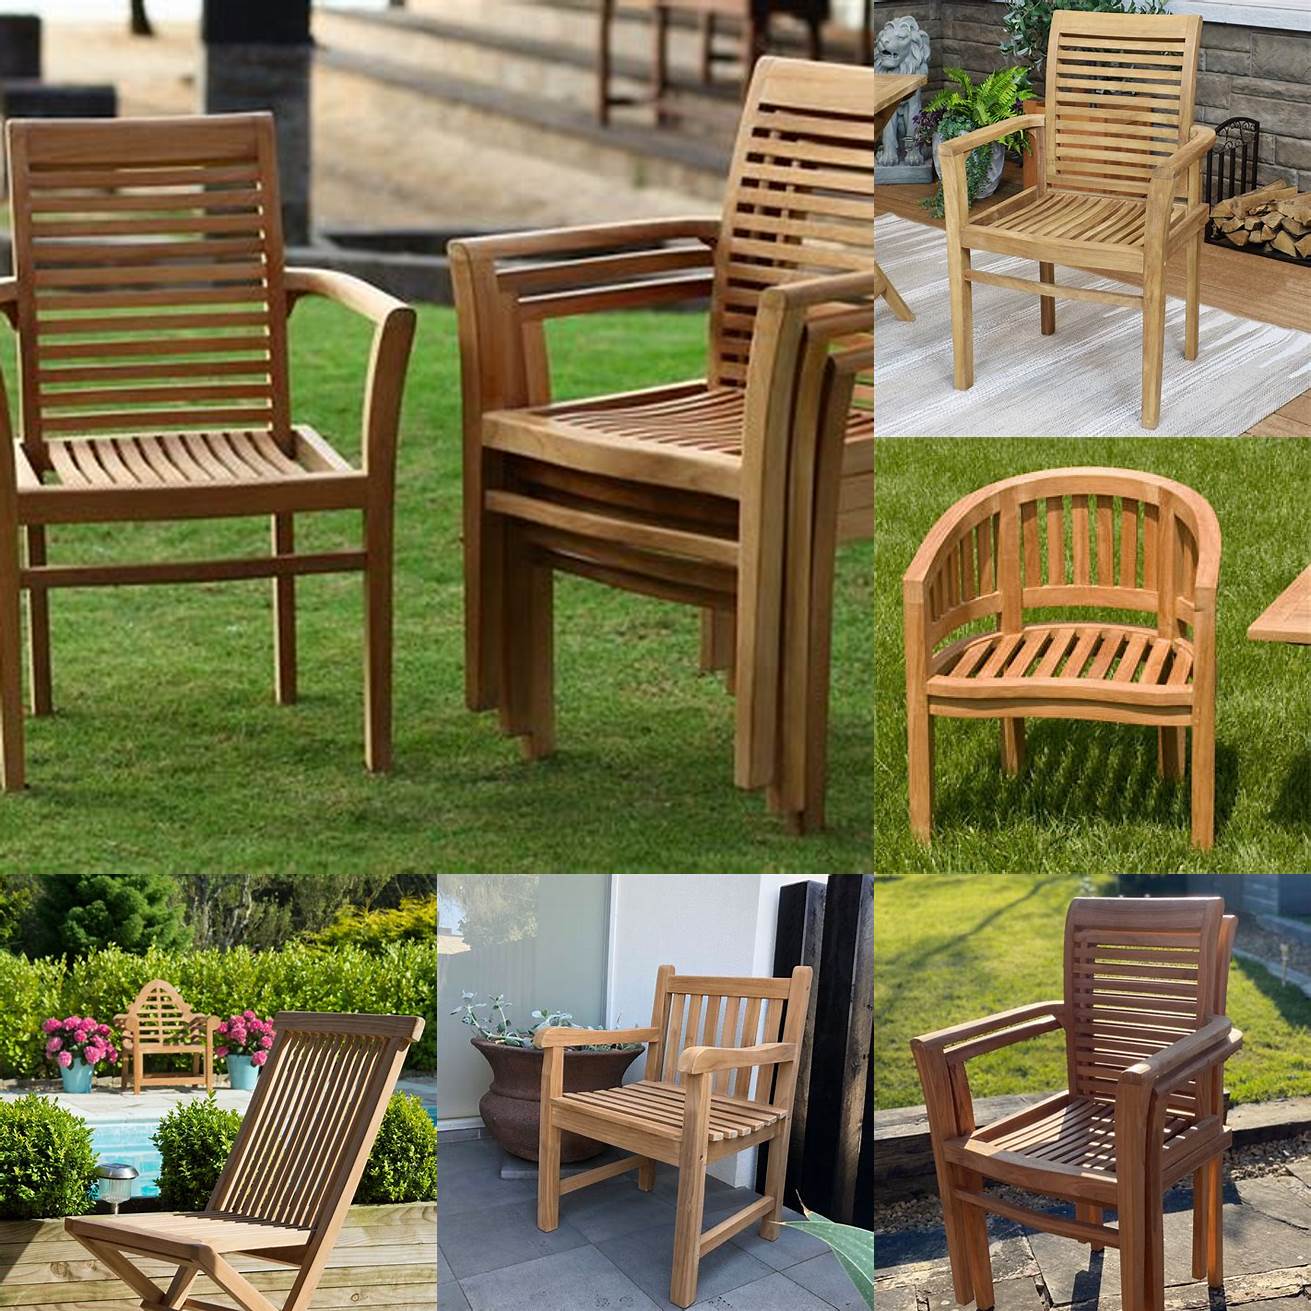 A teak garden chair with a protective coating